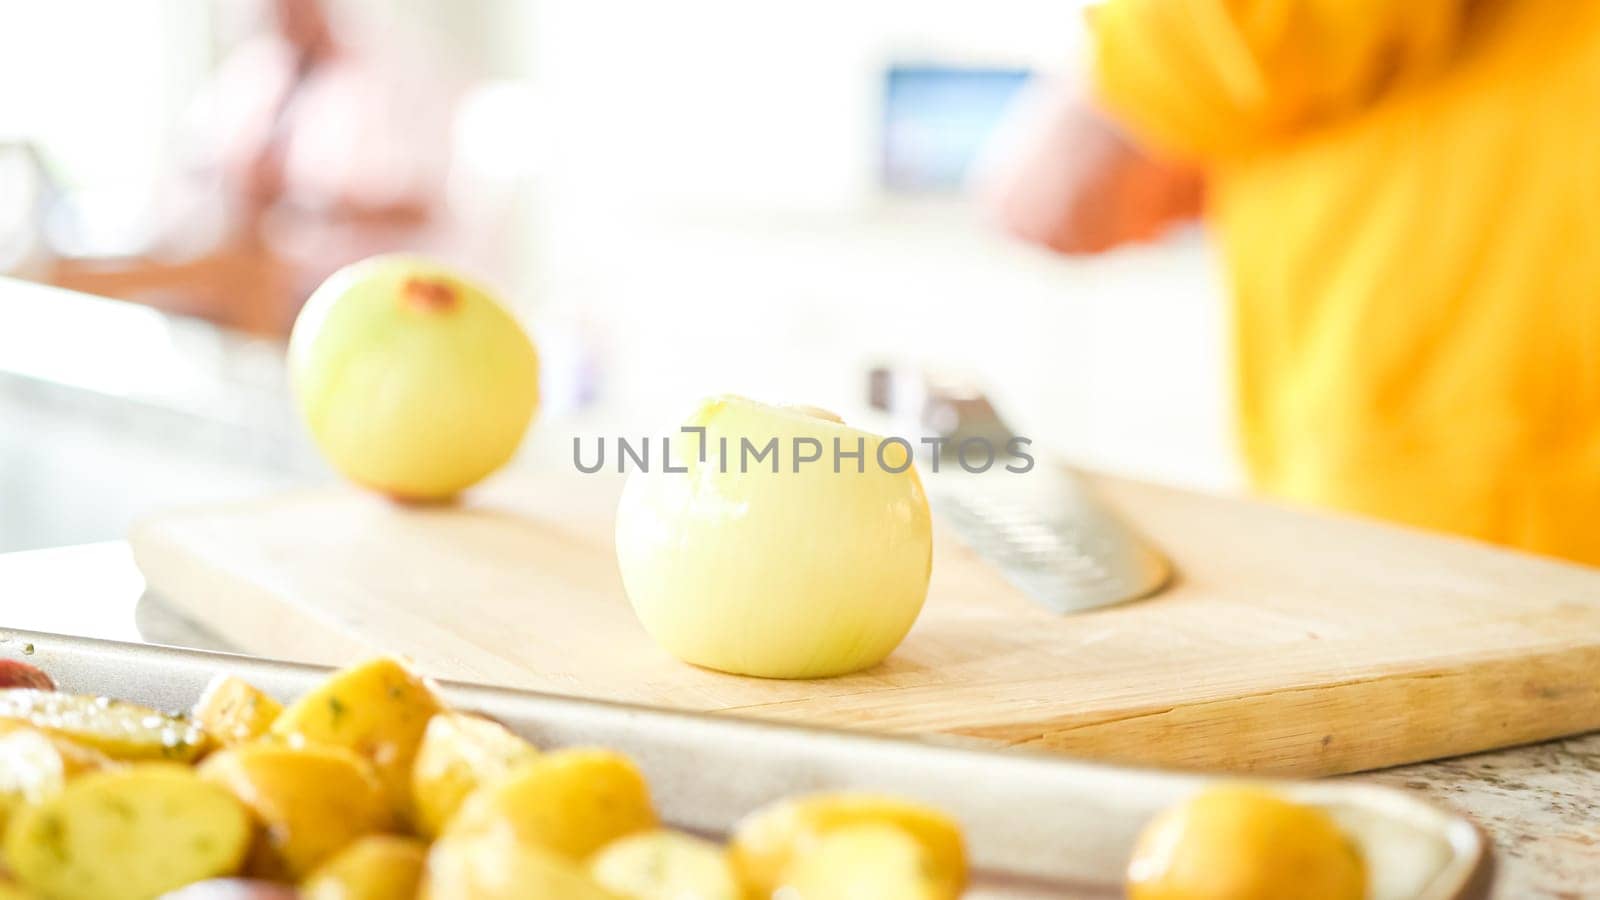 In the welcoming setting of a modern kitchen, a young man continues his dinner preparation process. He's currently involved in slicing yellow onions into rings, prepping them for grilling on an outdoor grill, a crucial step in creating a flavorful meal.